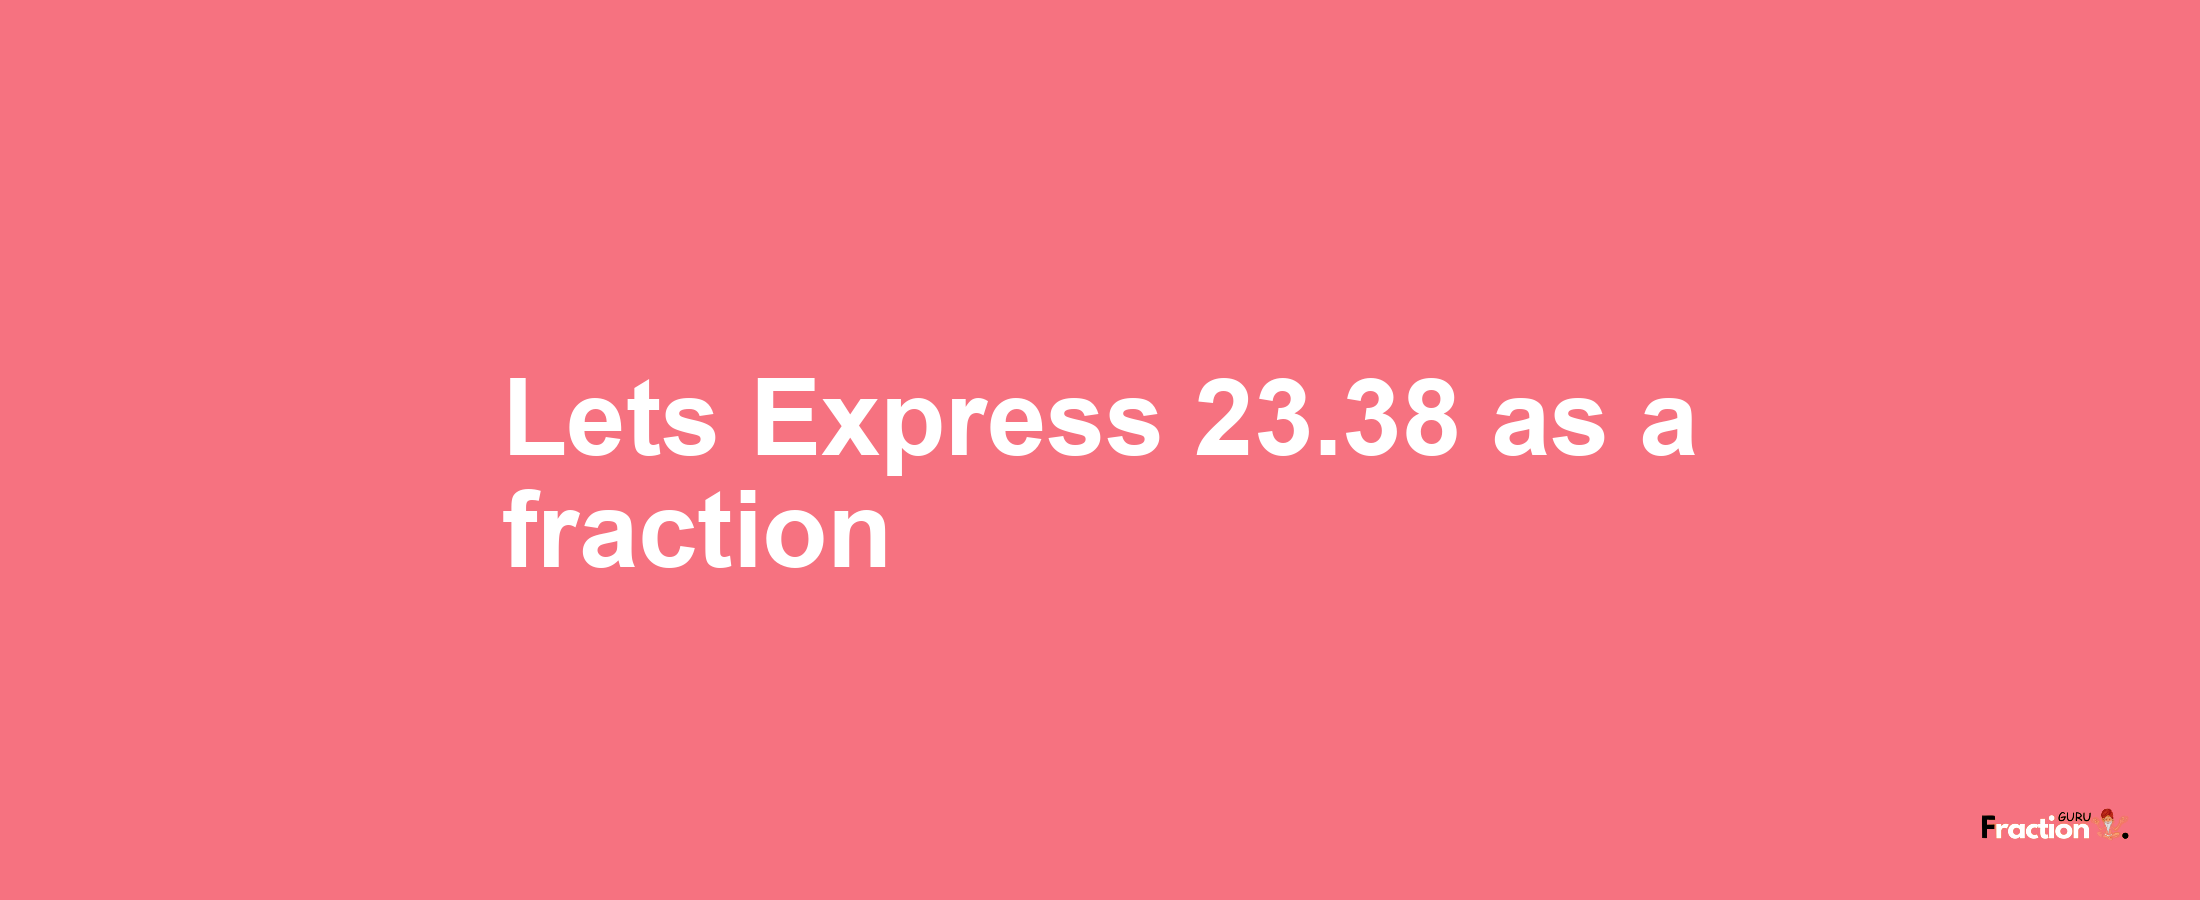 Lets Express 23.38 as afraction